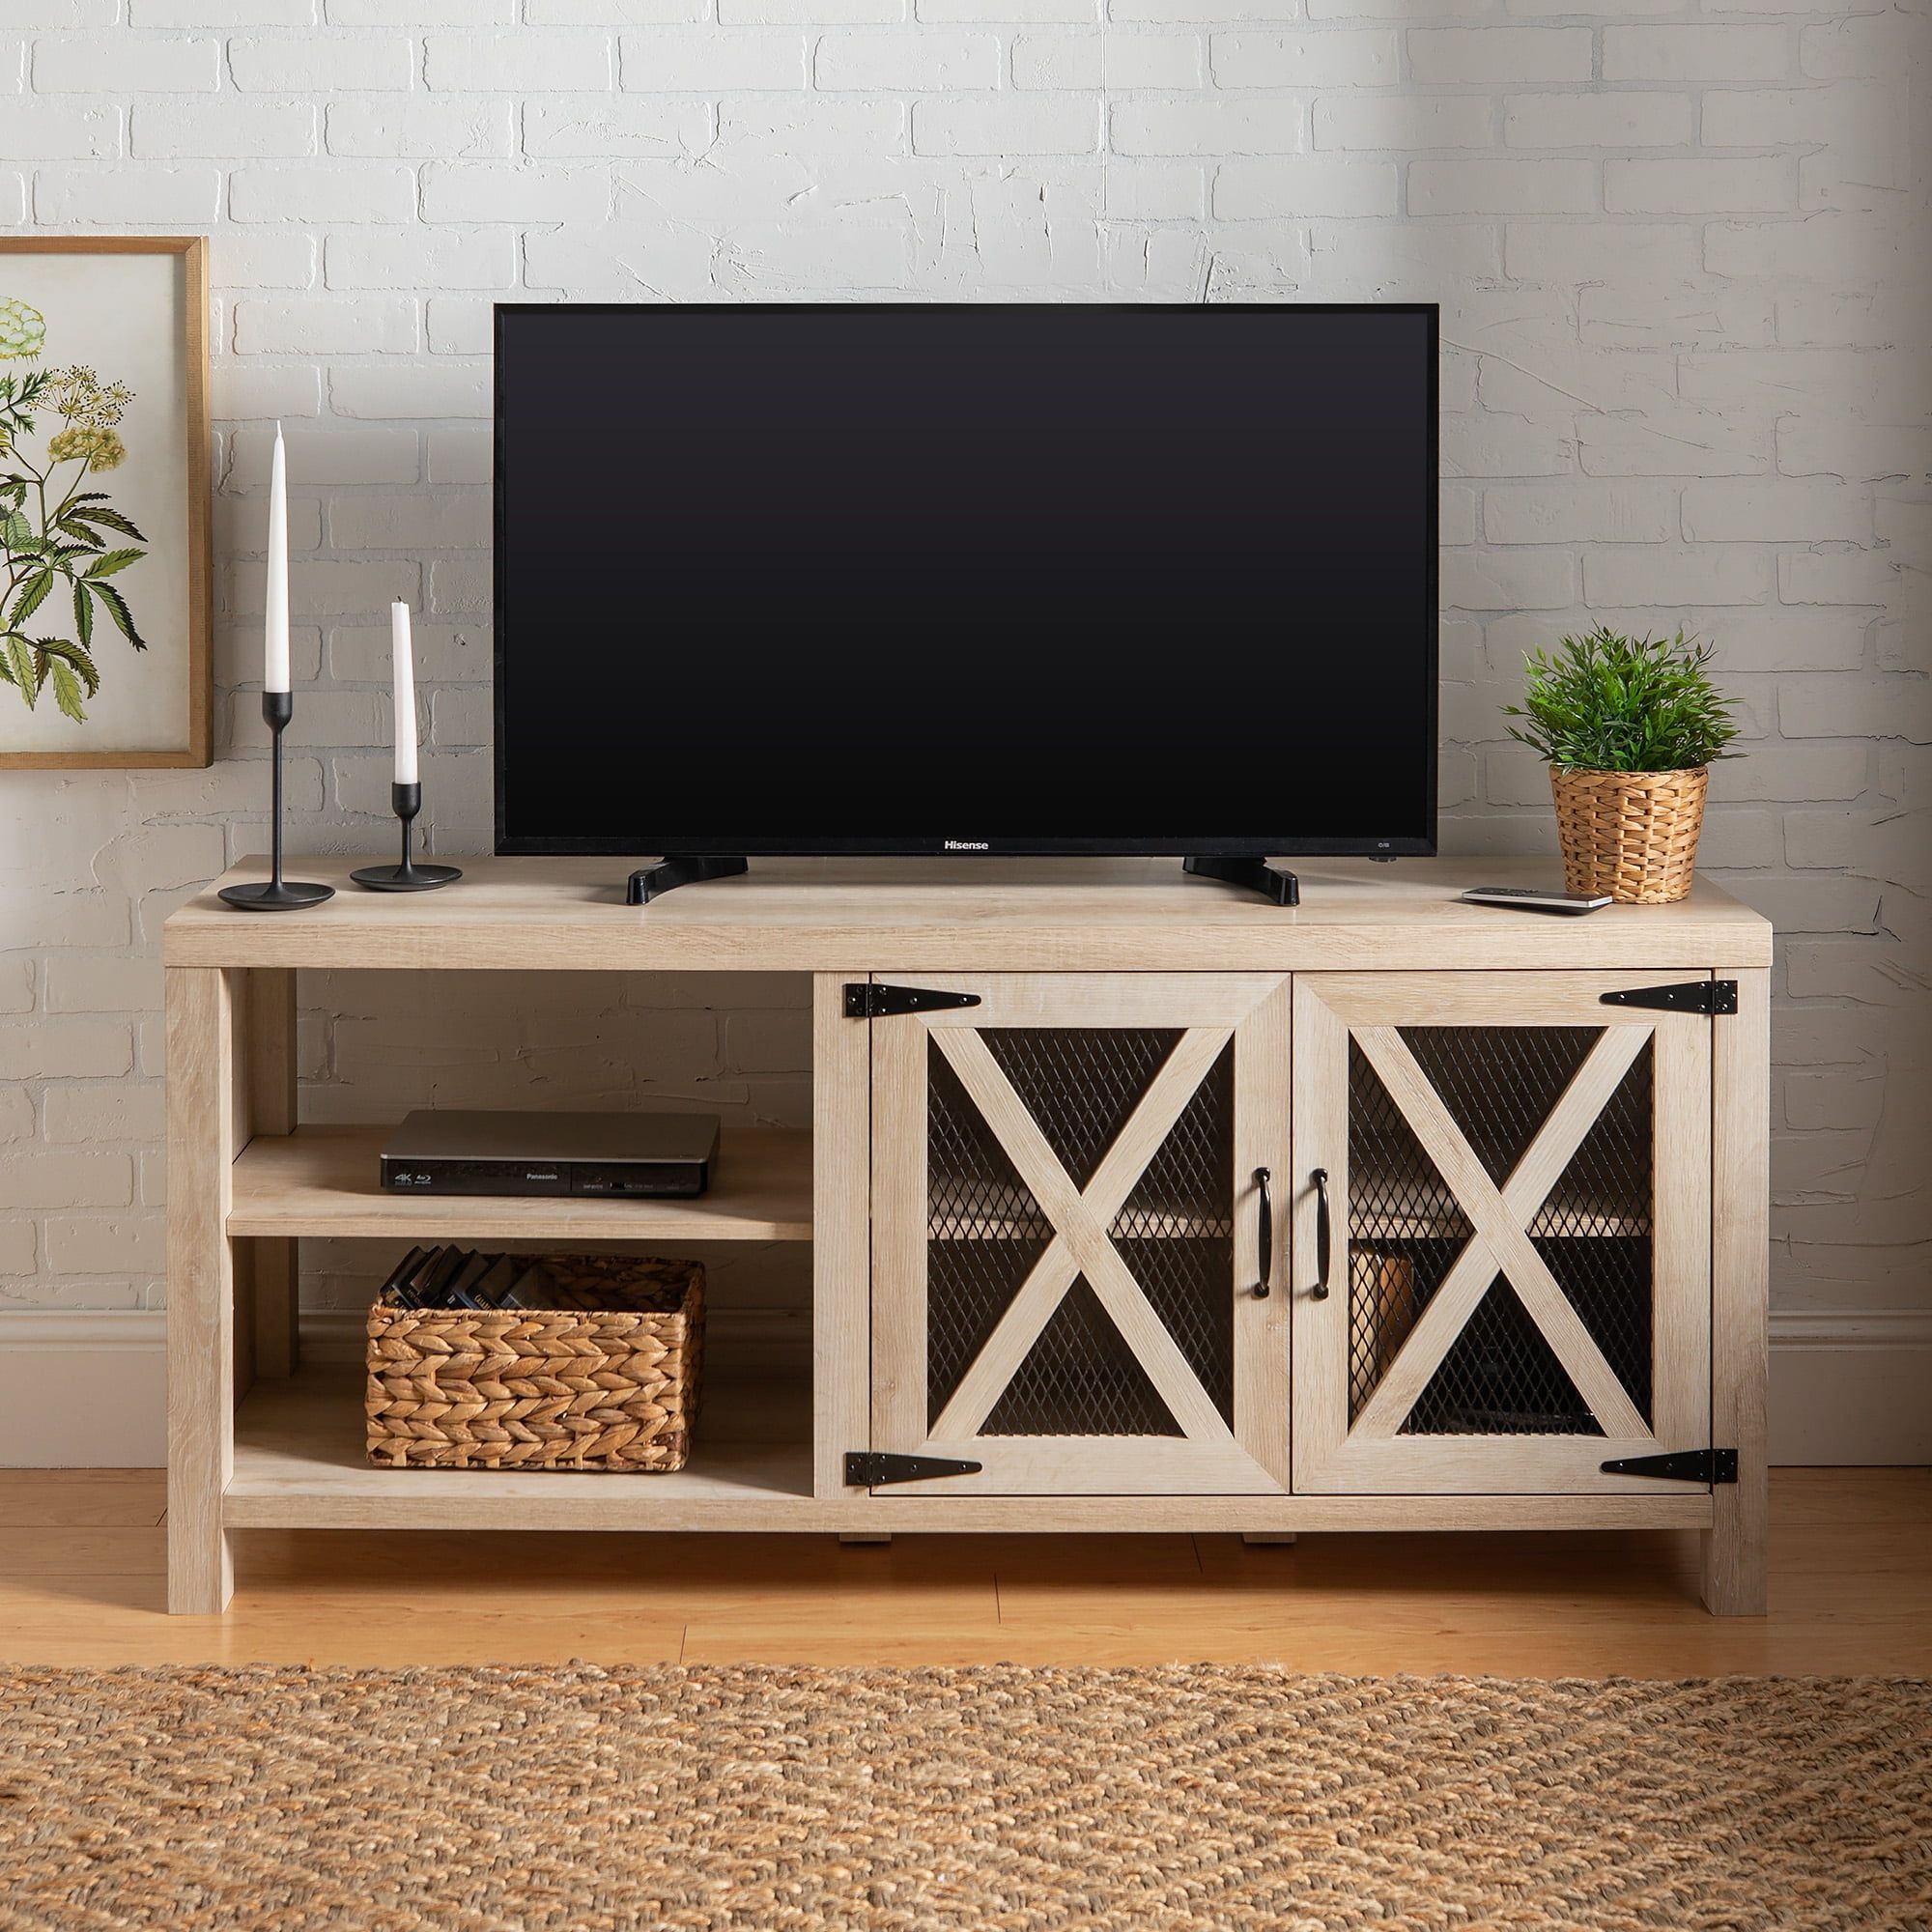 Manor Park Industrial Farmhouse Tv Stand For Tvs Up To 64" – White Oak With Farmhouse Tv Stands (View 3 of 20)